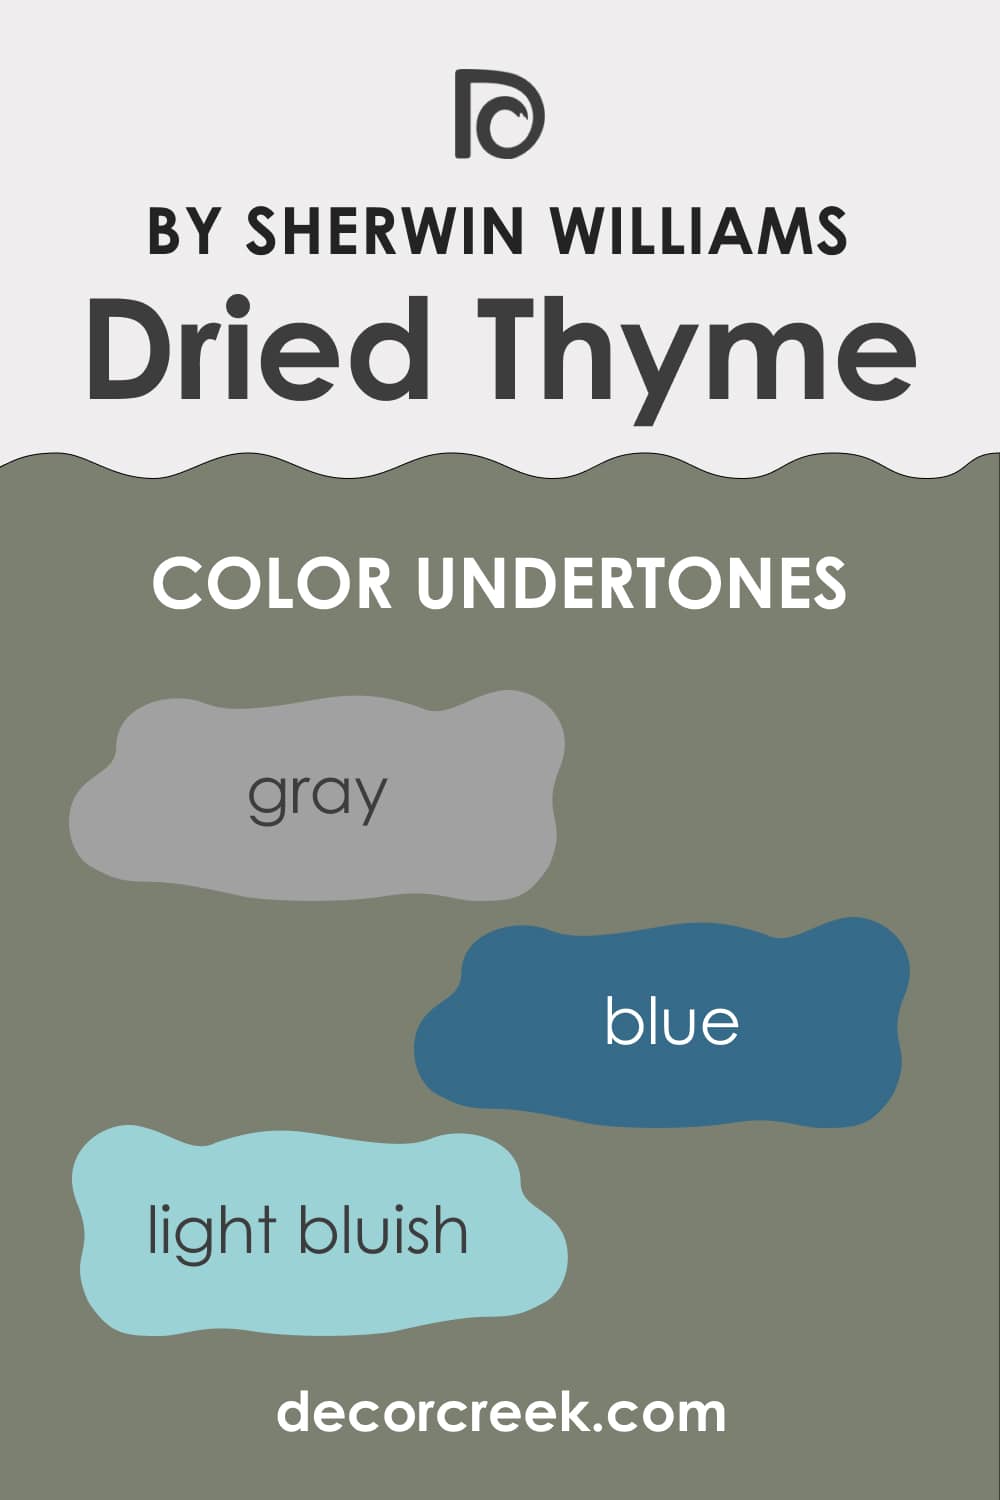 What Undertones Does Dried Thyme Paint Color Have?